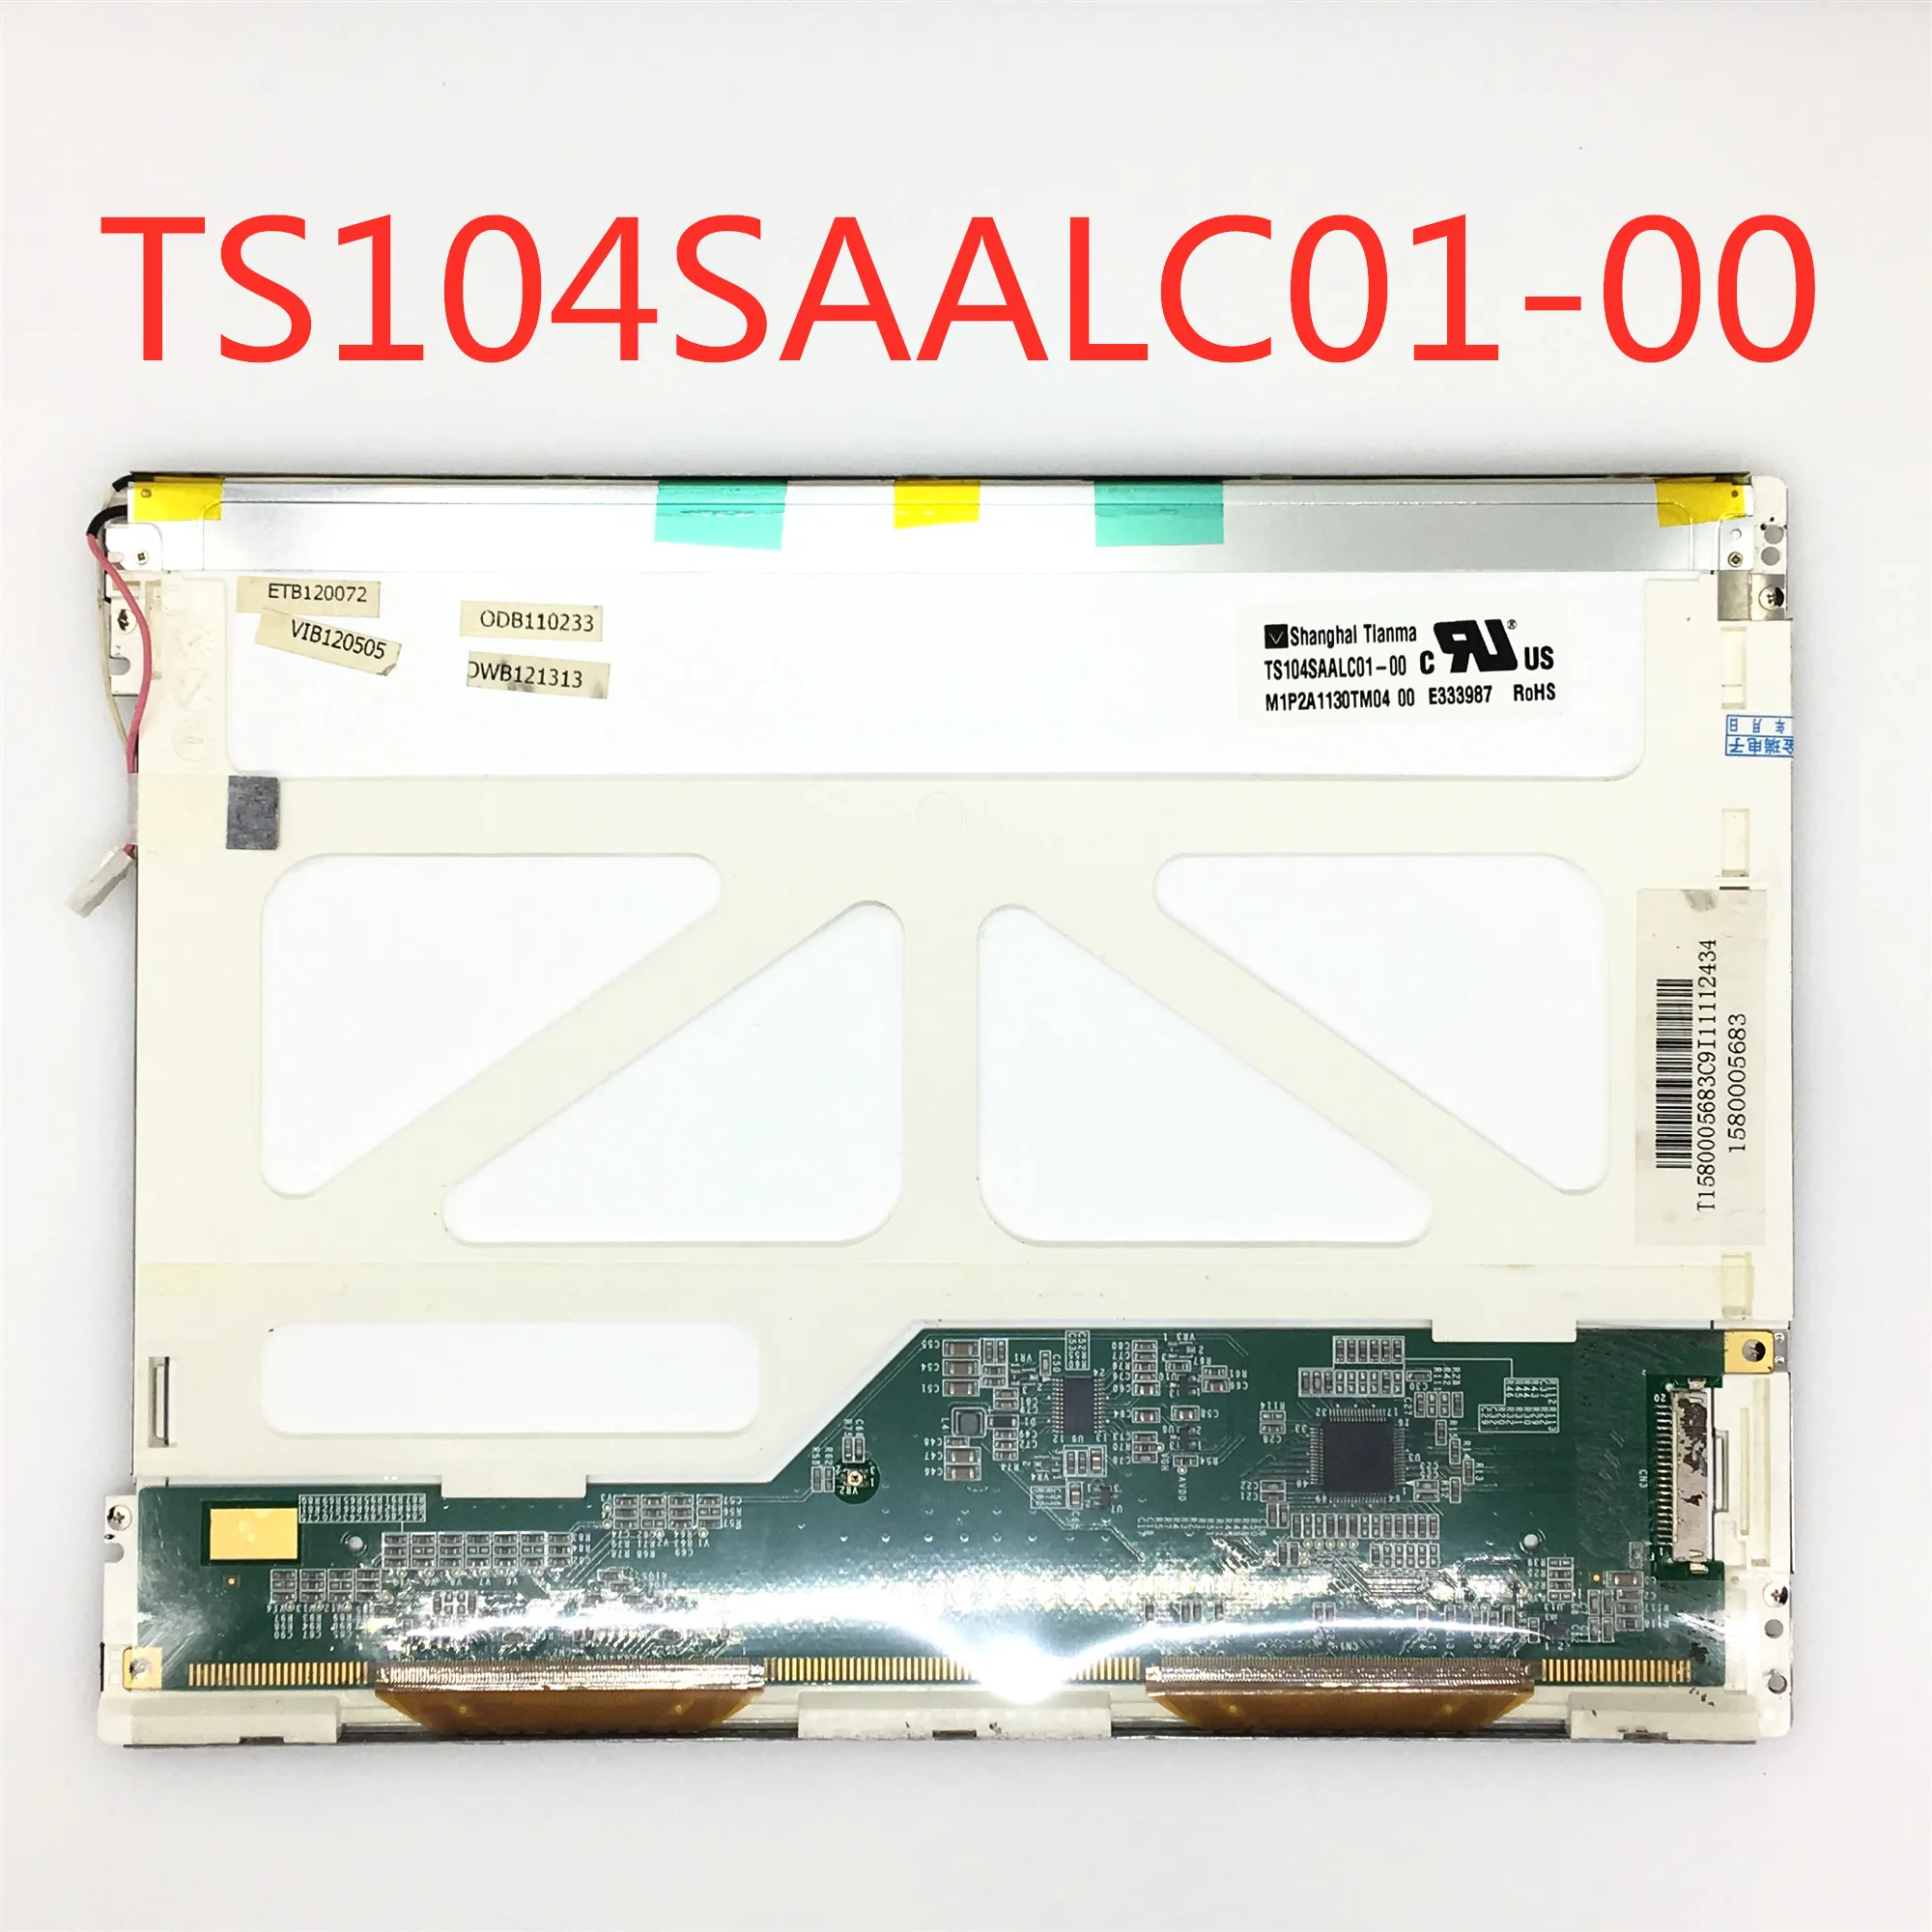 

Can provide test video , 90 days warranty 10.4" 800*600 a-si TFT lcd panel TS104SAALC01-00